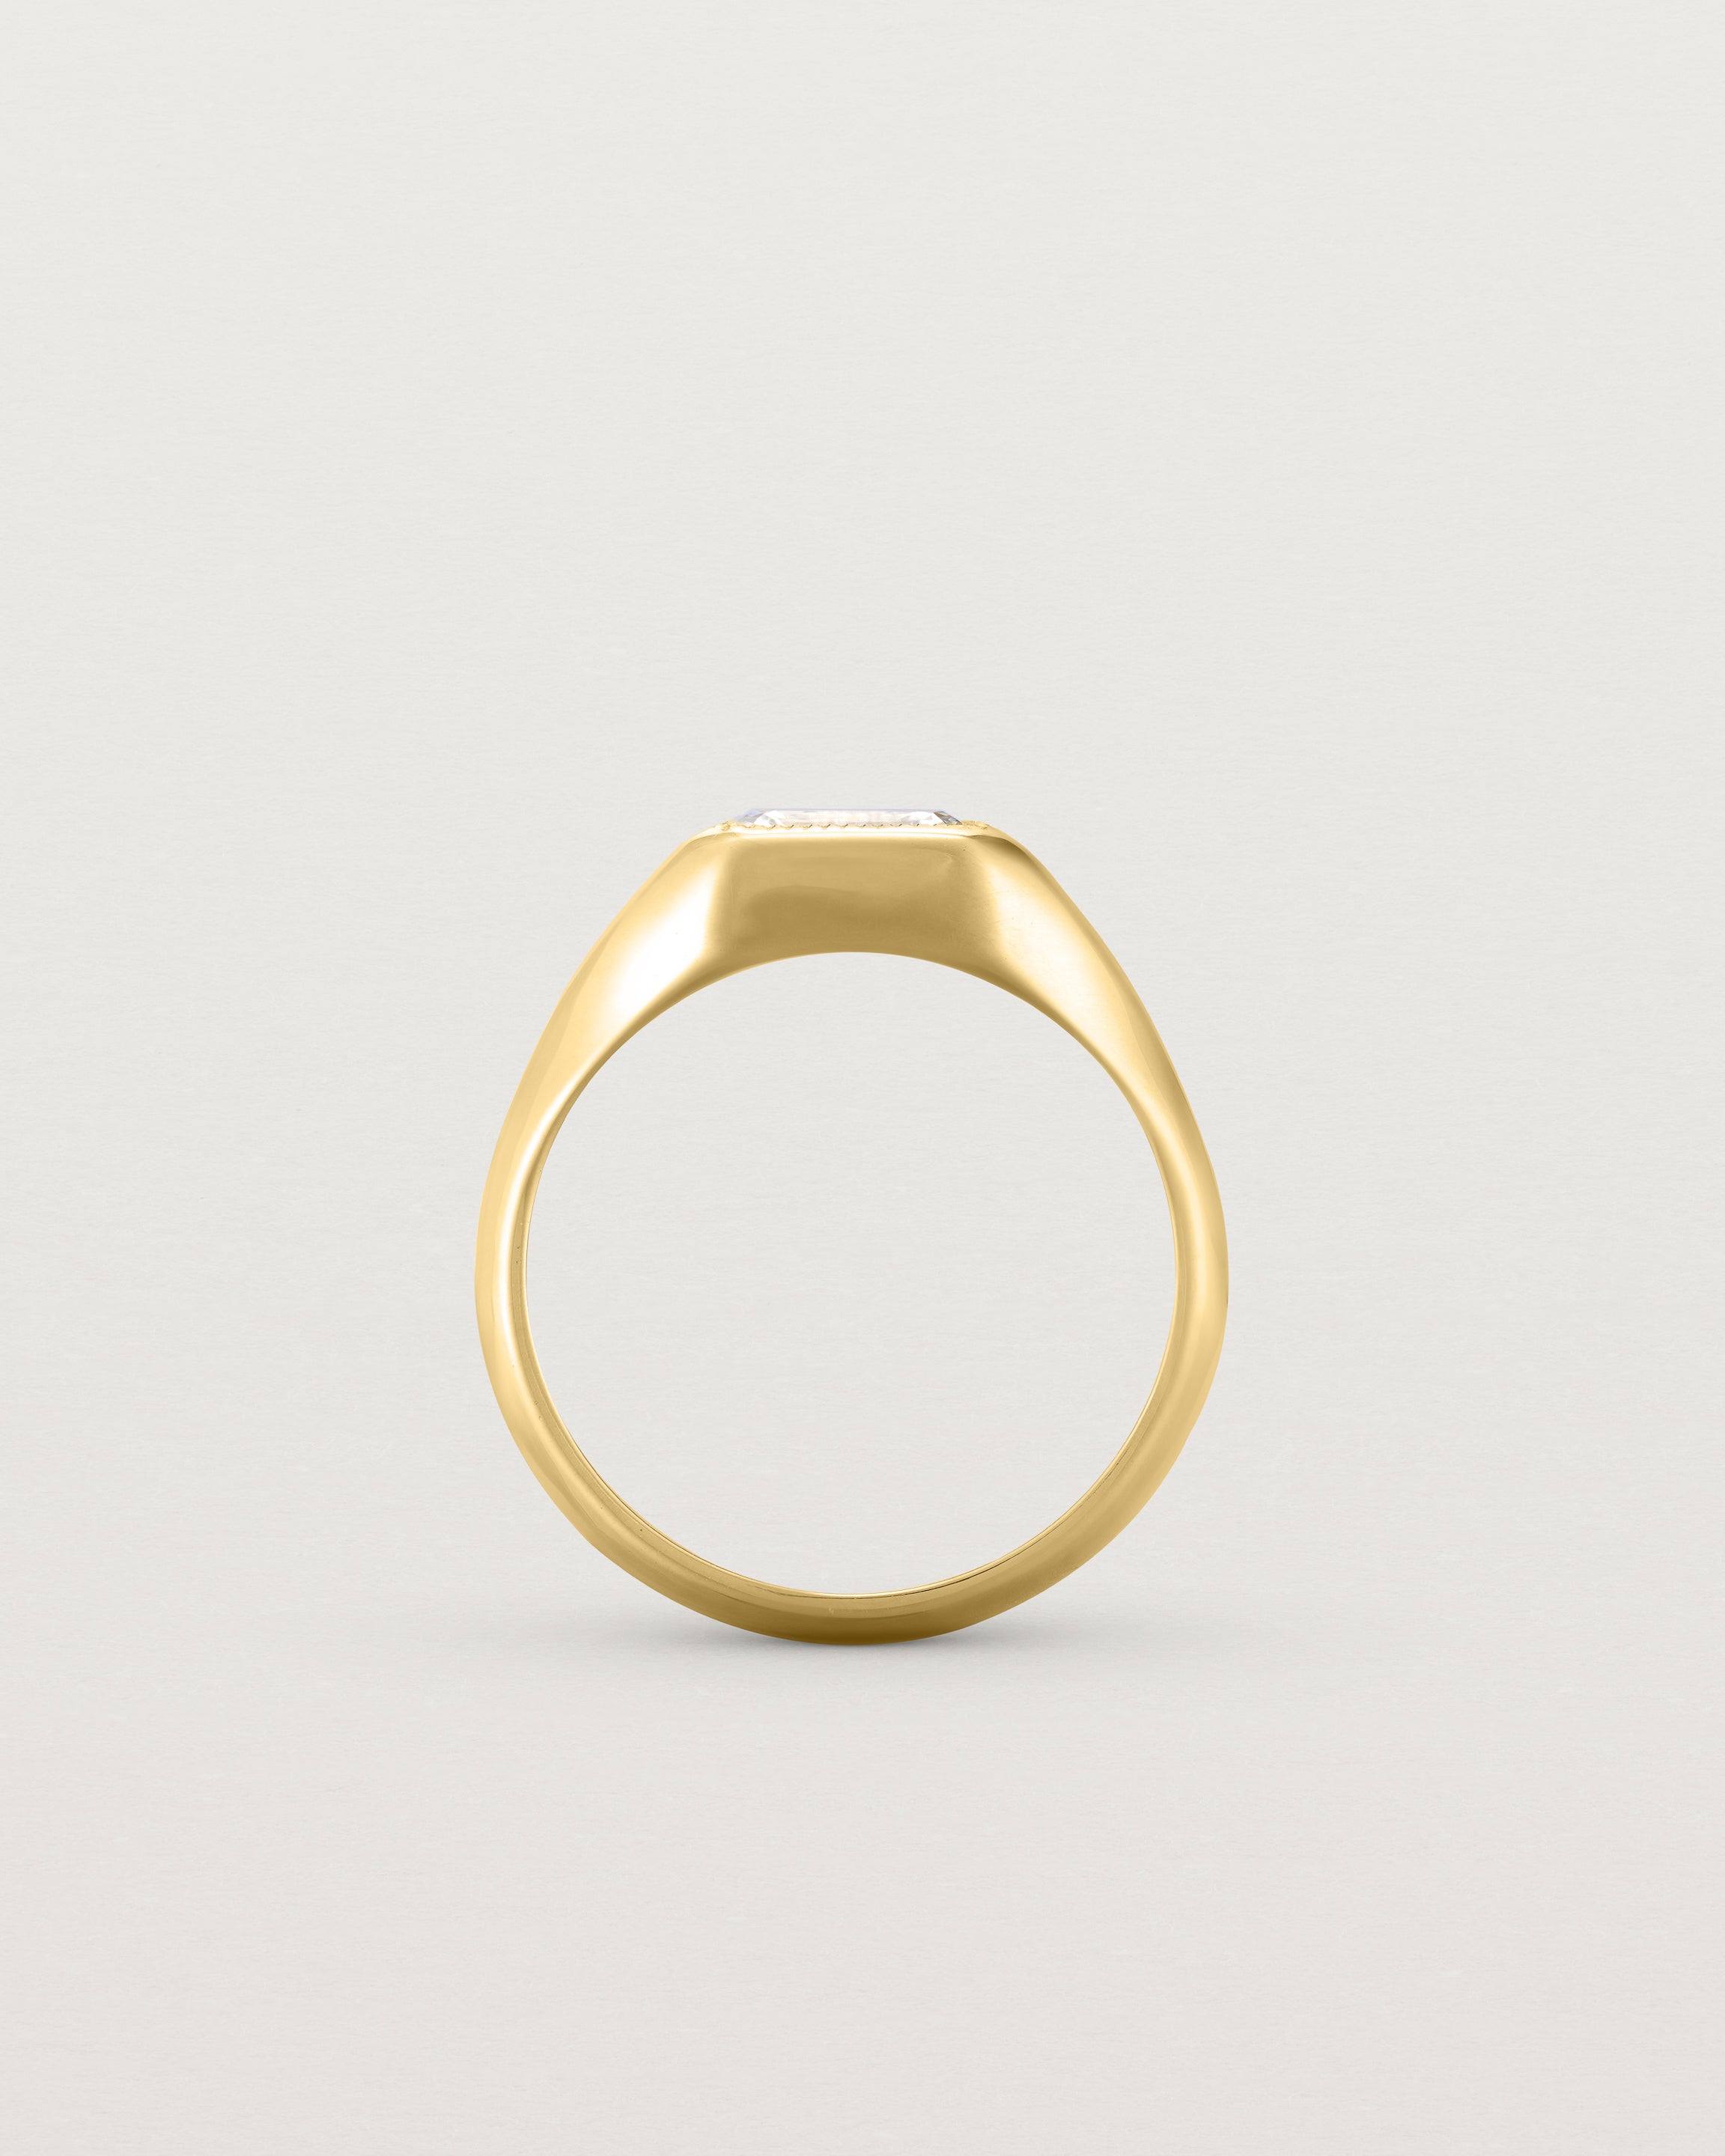 Standing view of the Átlas Emerald Signet | Laboratory Grown Diamond in yellow gold with a polished finish. 